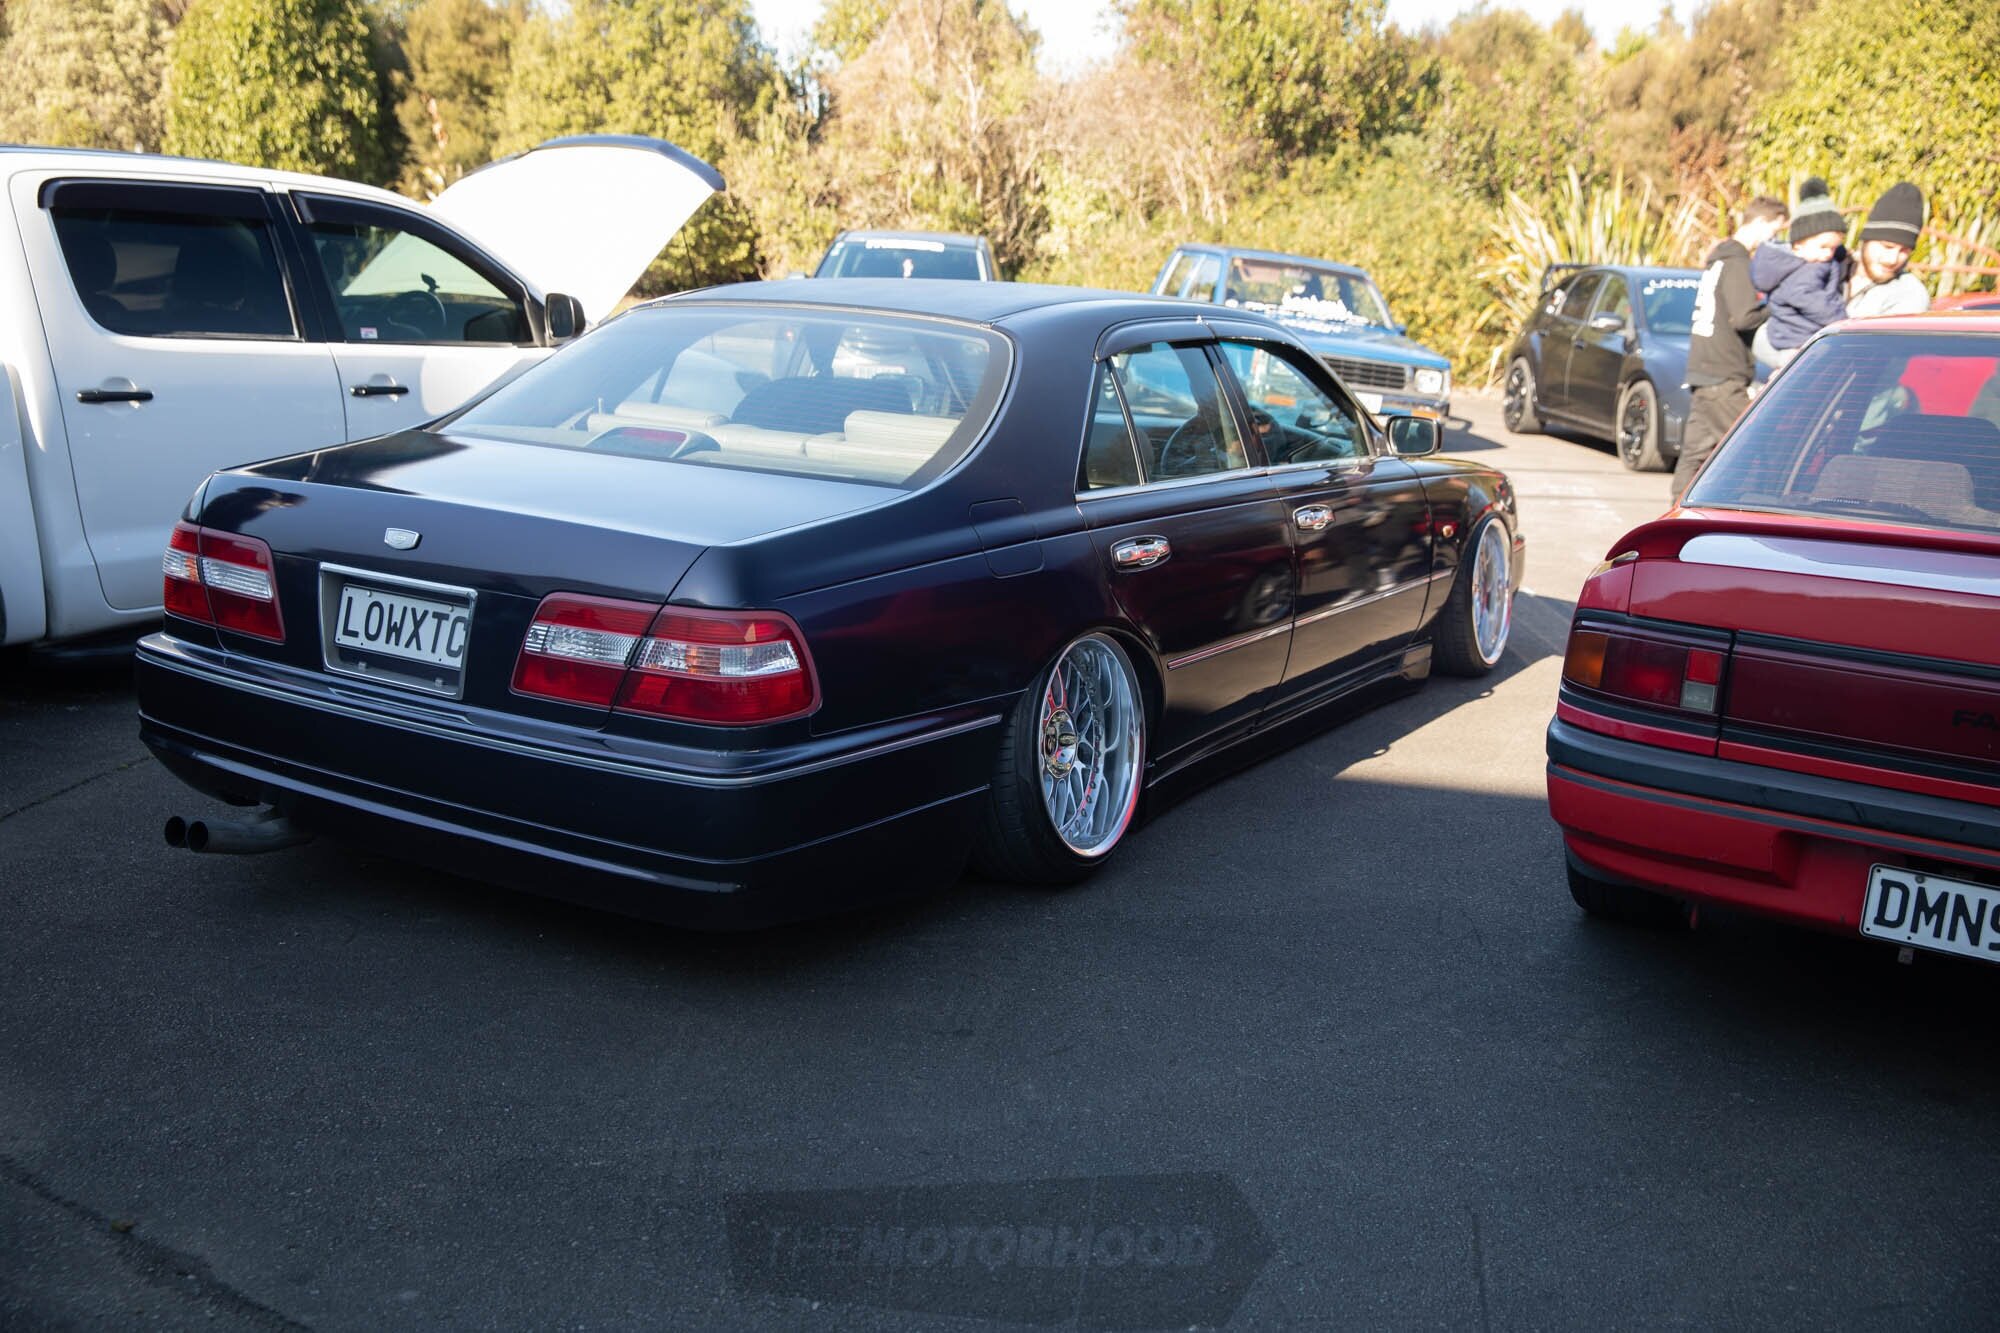 A beautiful Shakotan VIP example just lurking in the line-up.